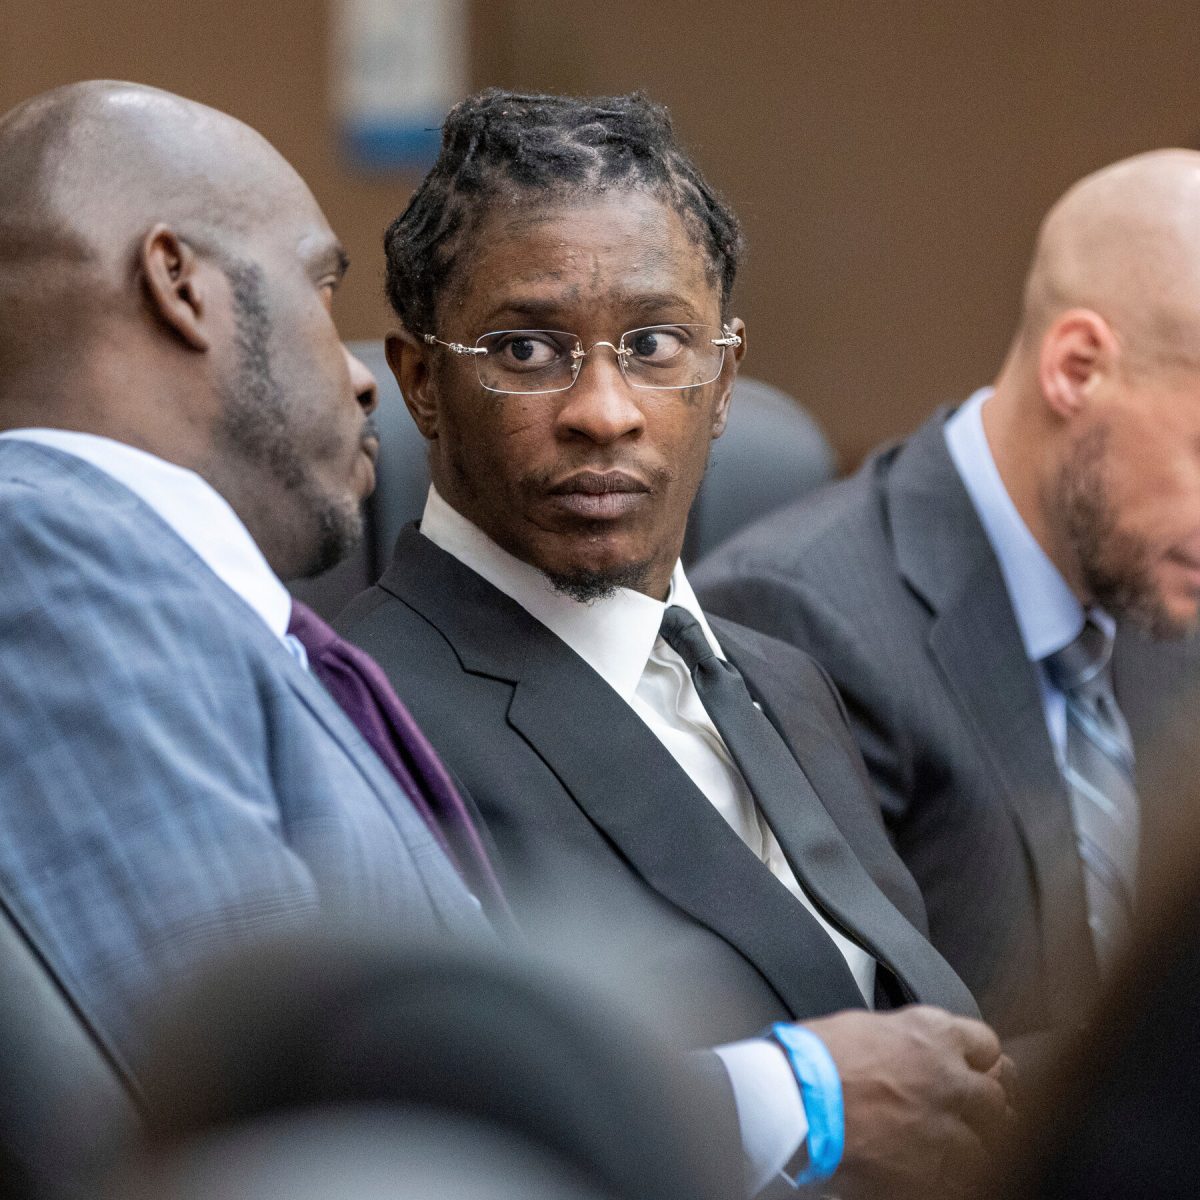 In+2022%2C+Young+Thug%E2%80%99s+record+label%2C+YSL%2C+was+indicted+with+56+charges.+Young+Thug%2C+center%2C+pleads+not+guilty%2C+claiming+he+is+innocent+of+all+charges+and+that+his+record+label+is+simply+a+label.